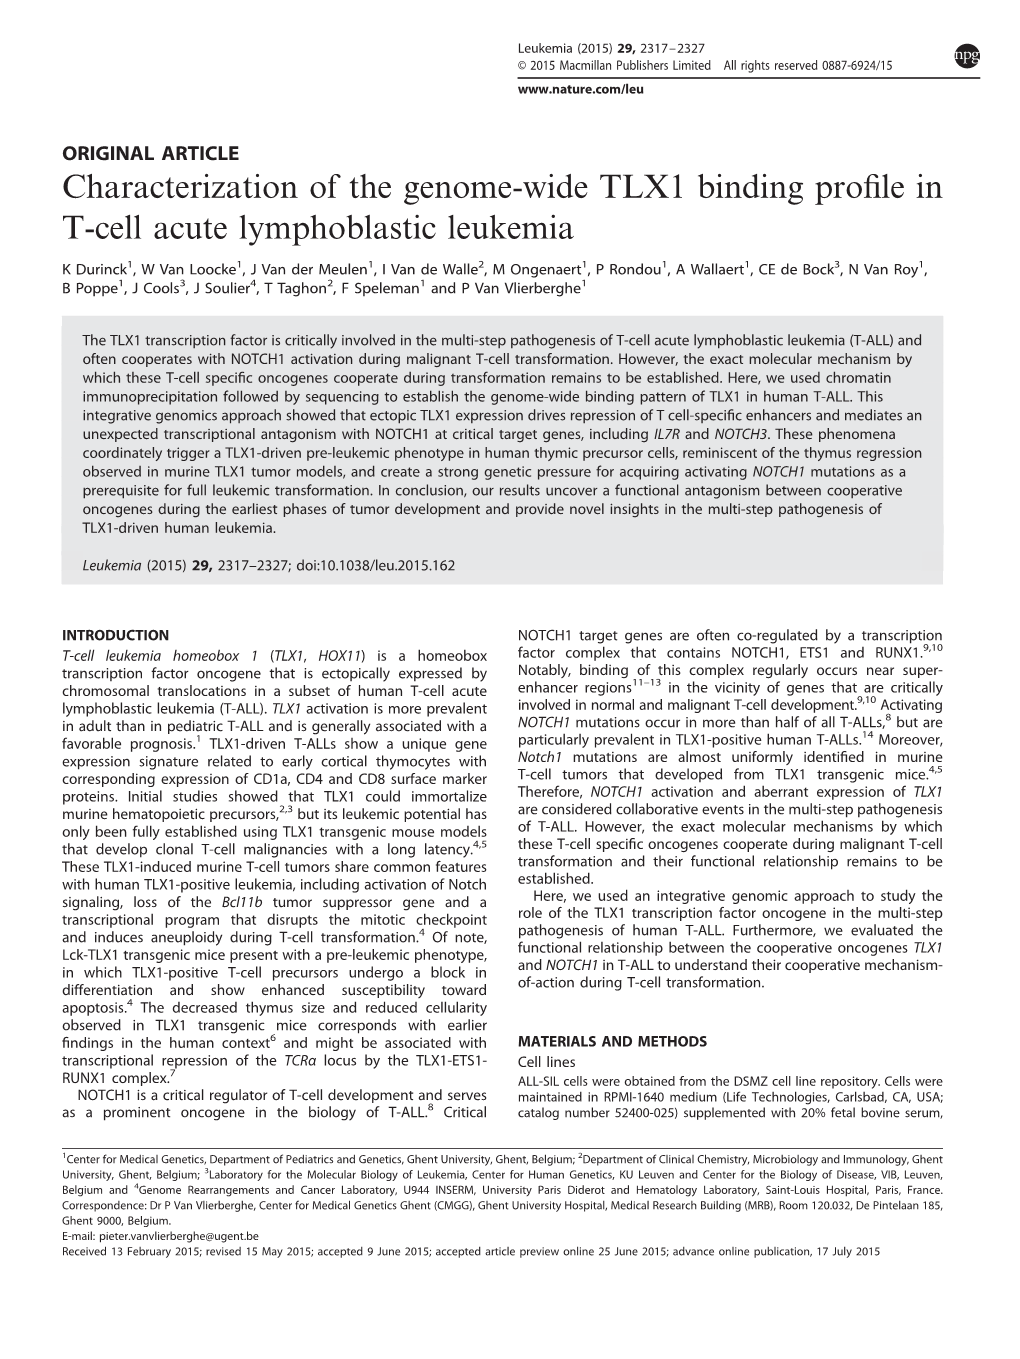 Characterization of the Genome-Wide TLX1 Binding Profile in T-Cell Acute Lymphoblastic Leukemia